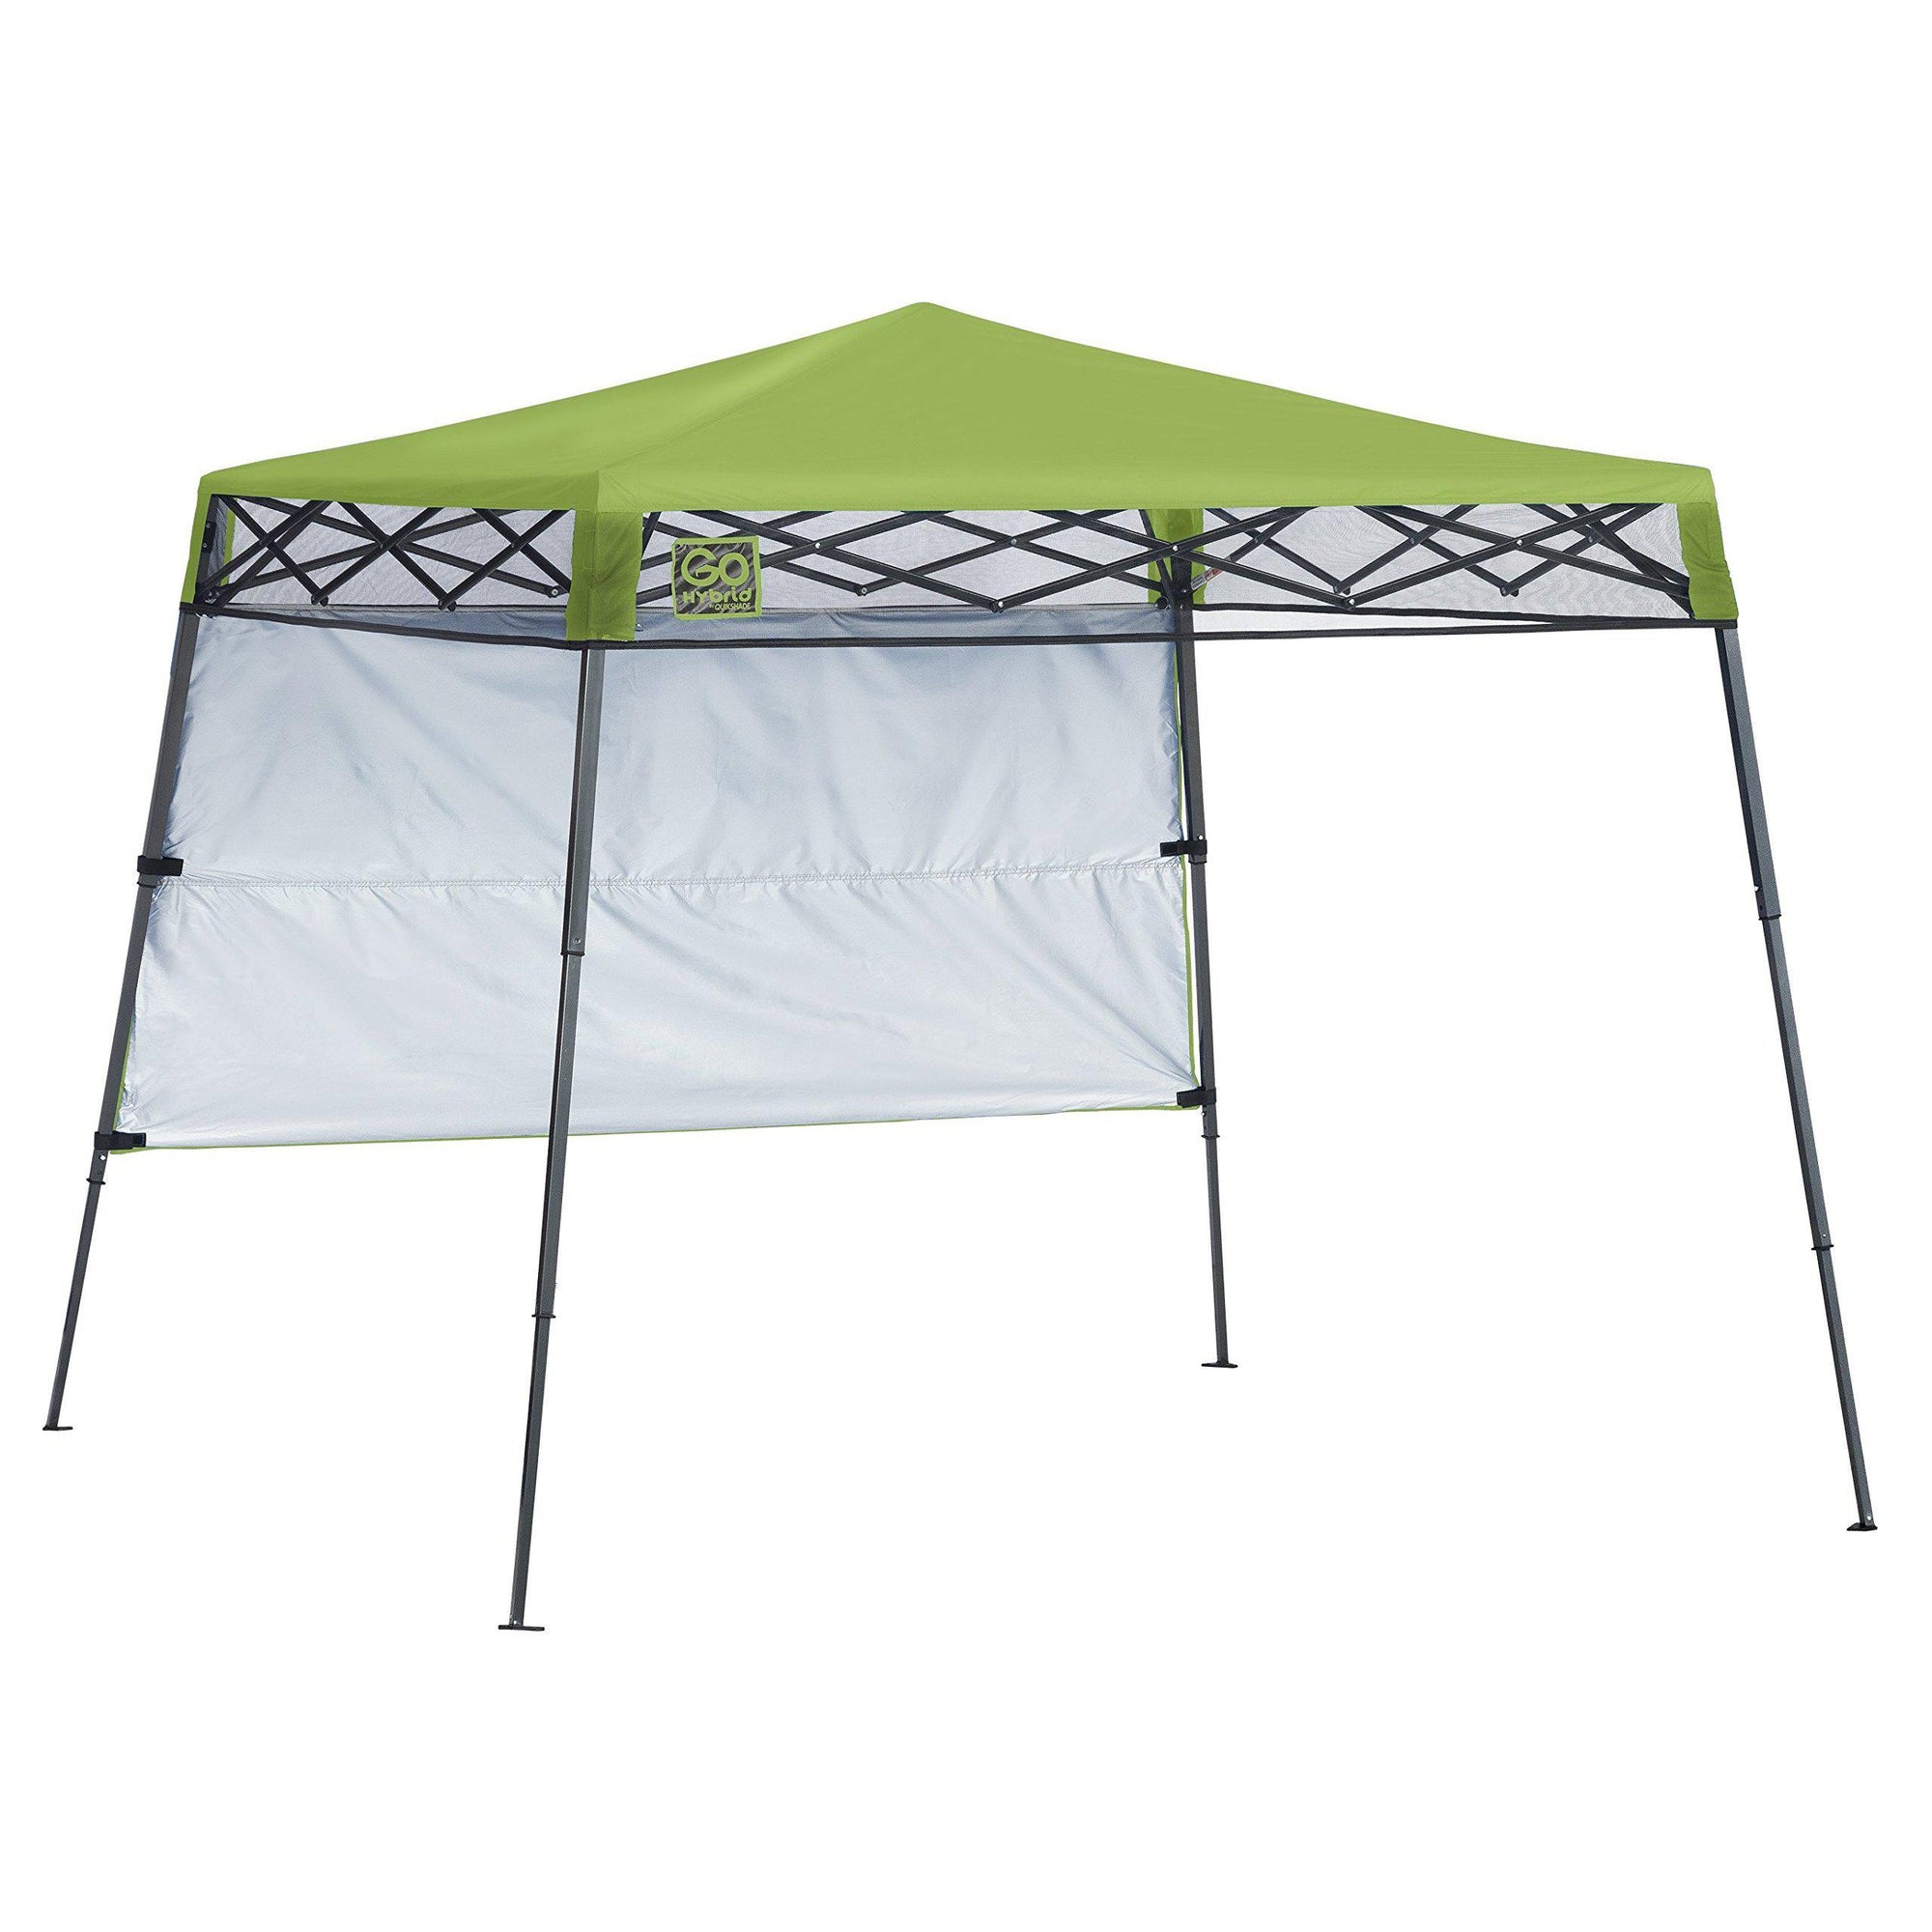 Quik Shade 7' x 7' Go Hybrid Pop-Up Compact and Lightweight Slant Leg Backpack Canopy